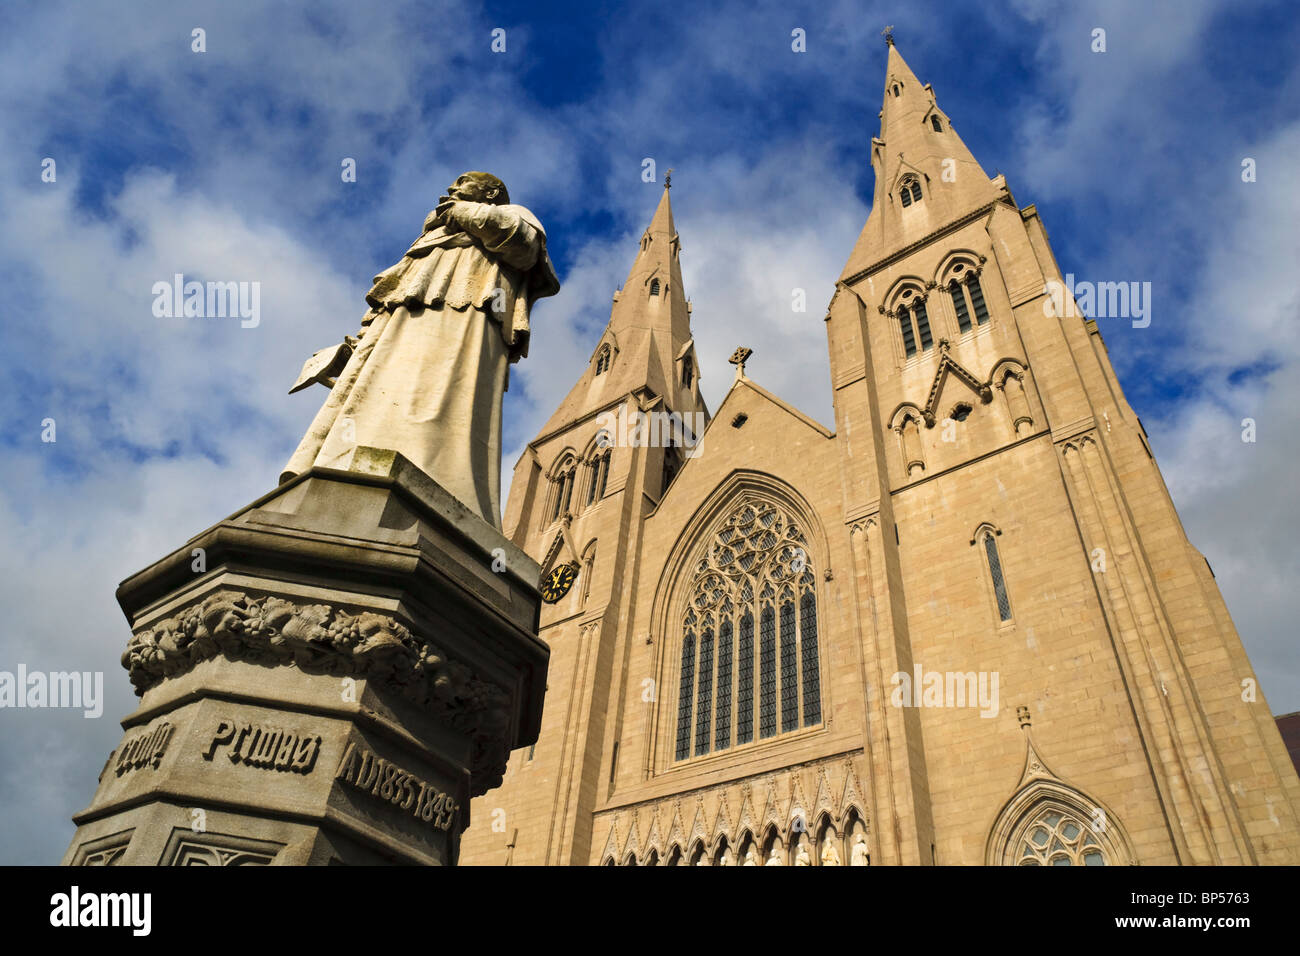 Die Fassade der St. Patricks Kathedrale in Armagh, County Armagh, Nordirland Stockfoto